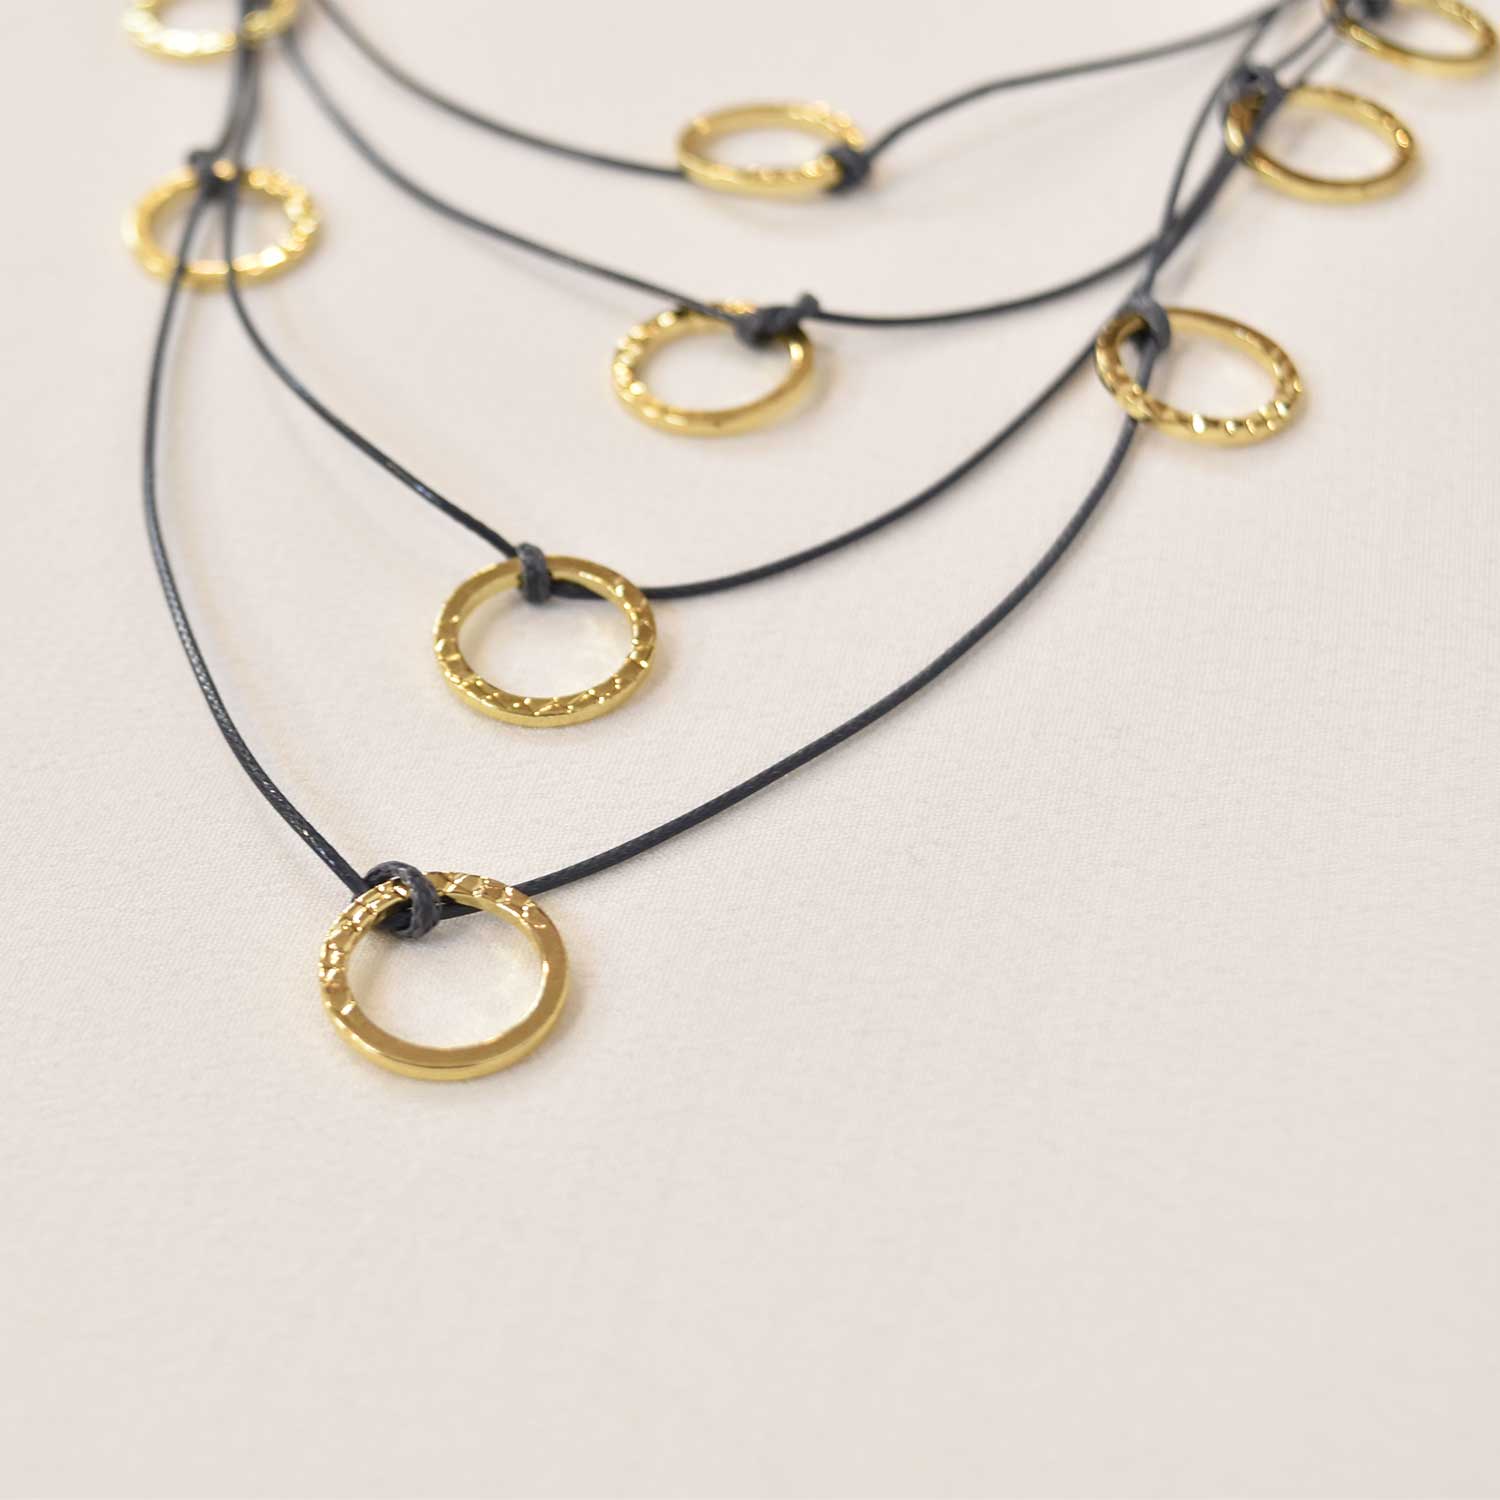 Waxed rope necklace hoops gold